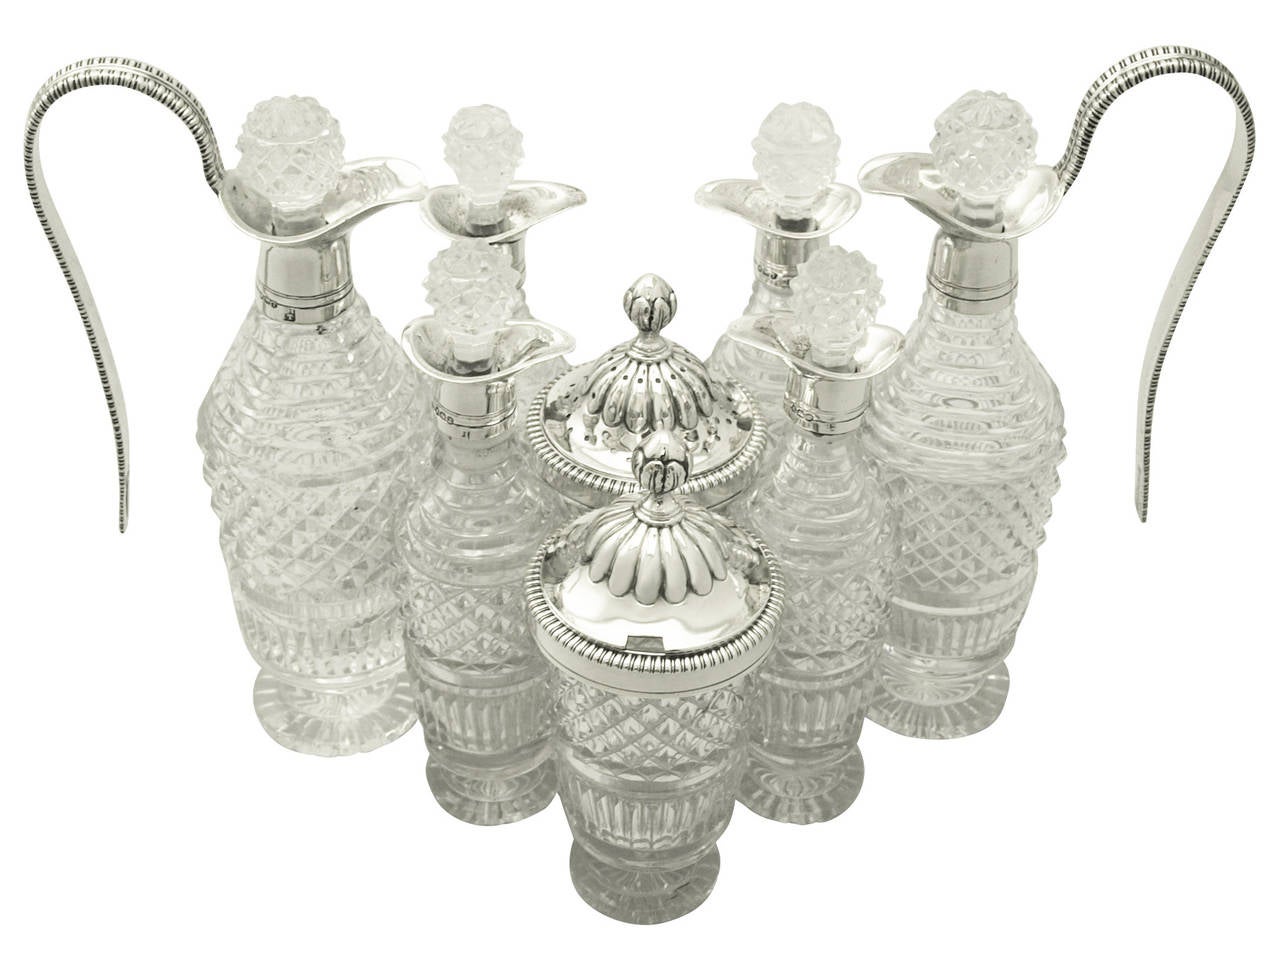 An exceptional, fine and impressive antique Georgian English sterling silver and cut-glass eight bottle table cruet set; an addition to our collectable dining silverware.

This exceptional antique George III cut-glass and sterling silver cruet set